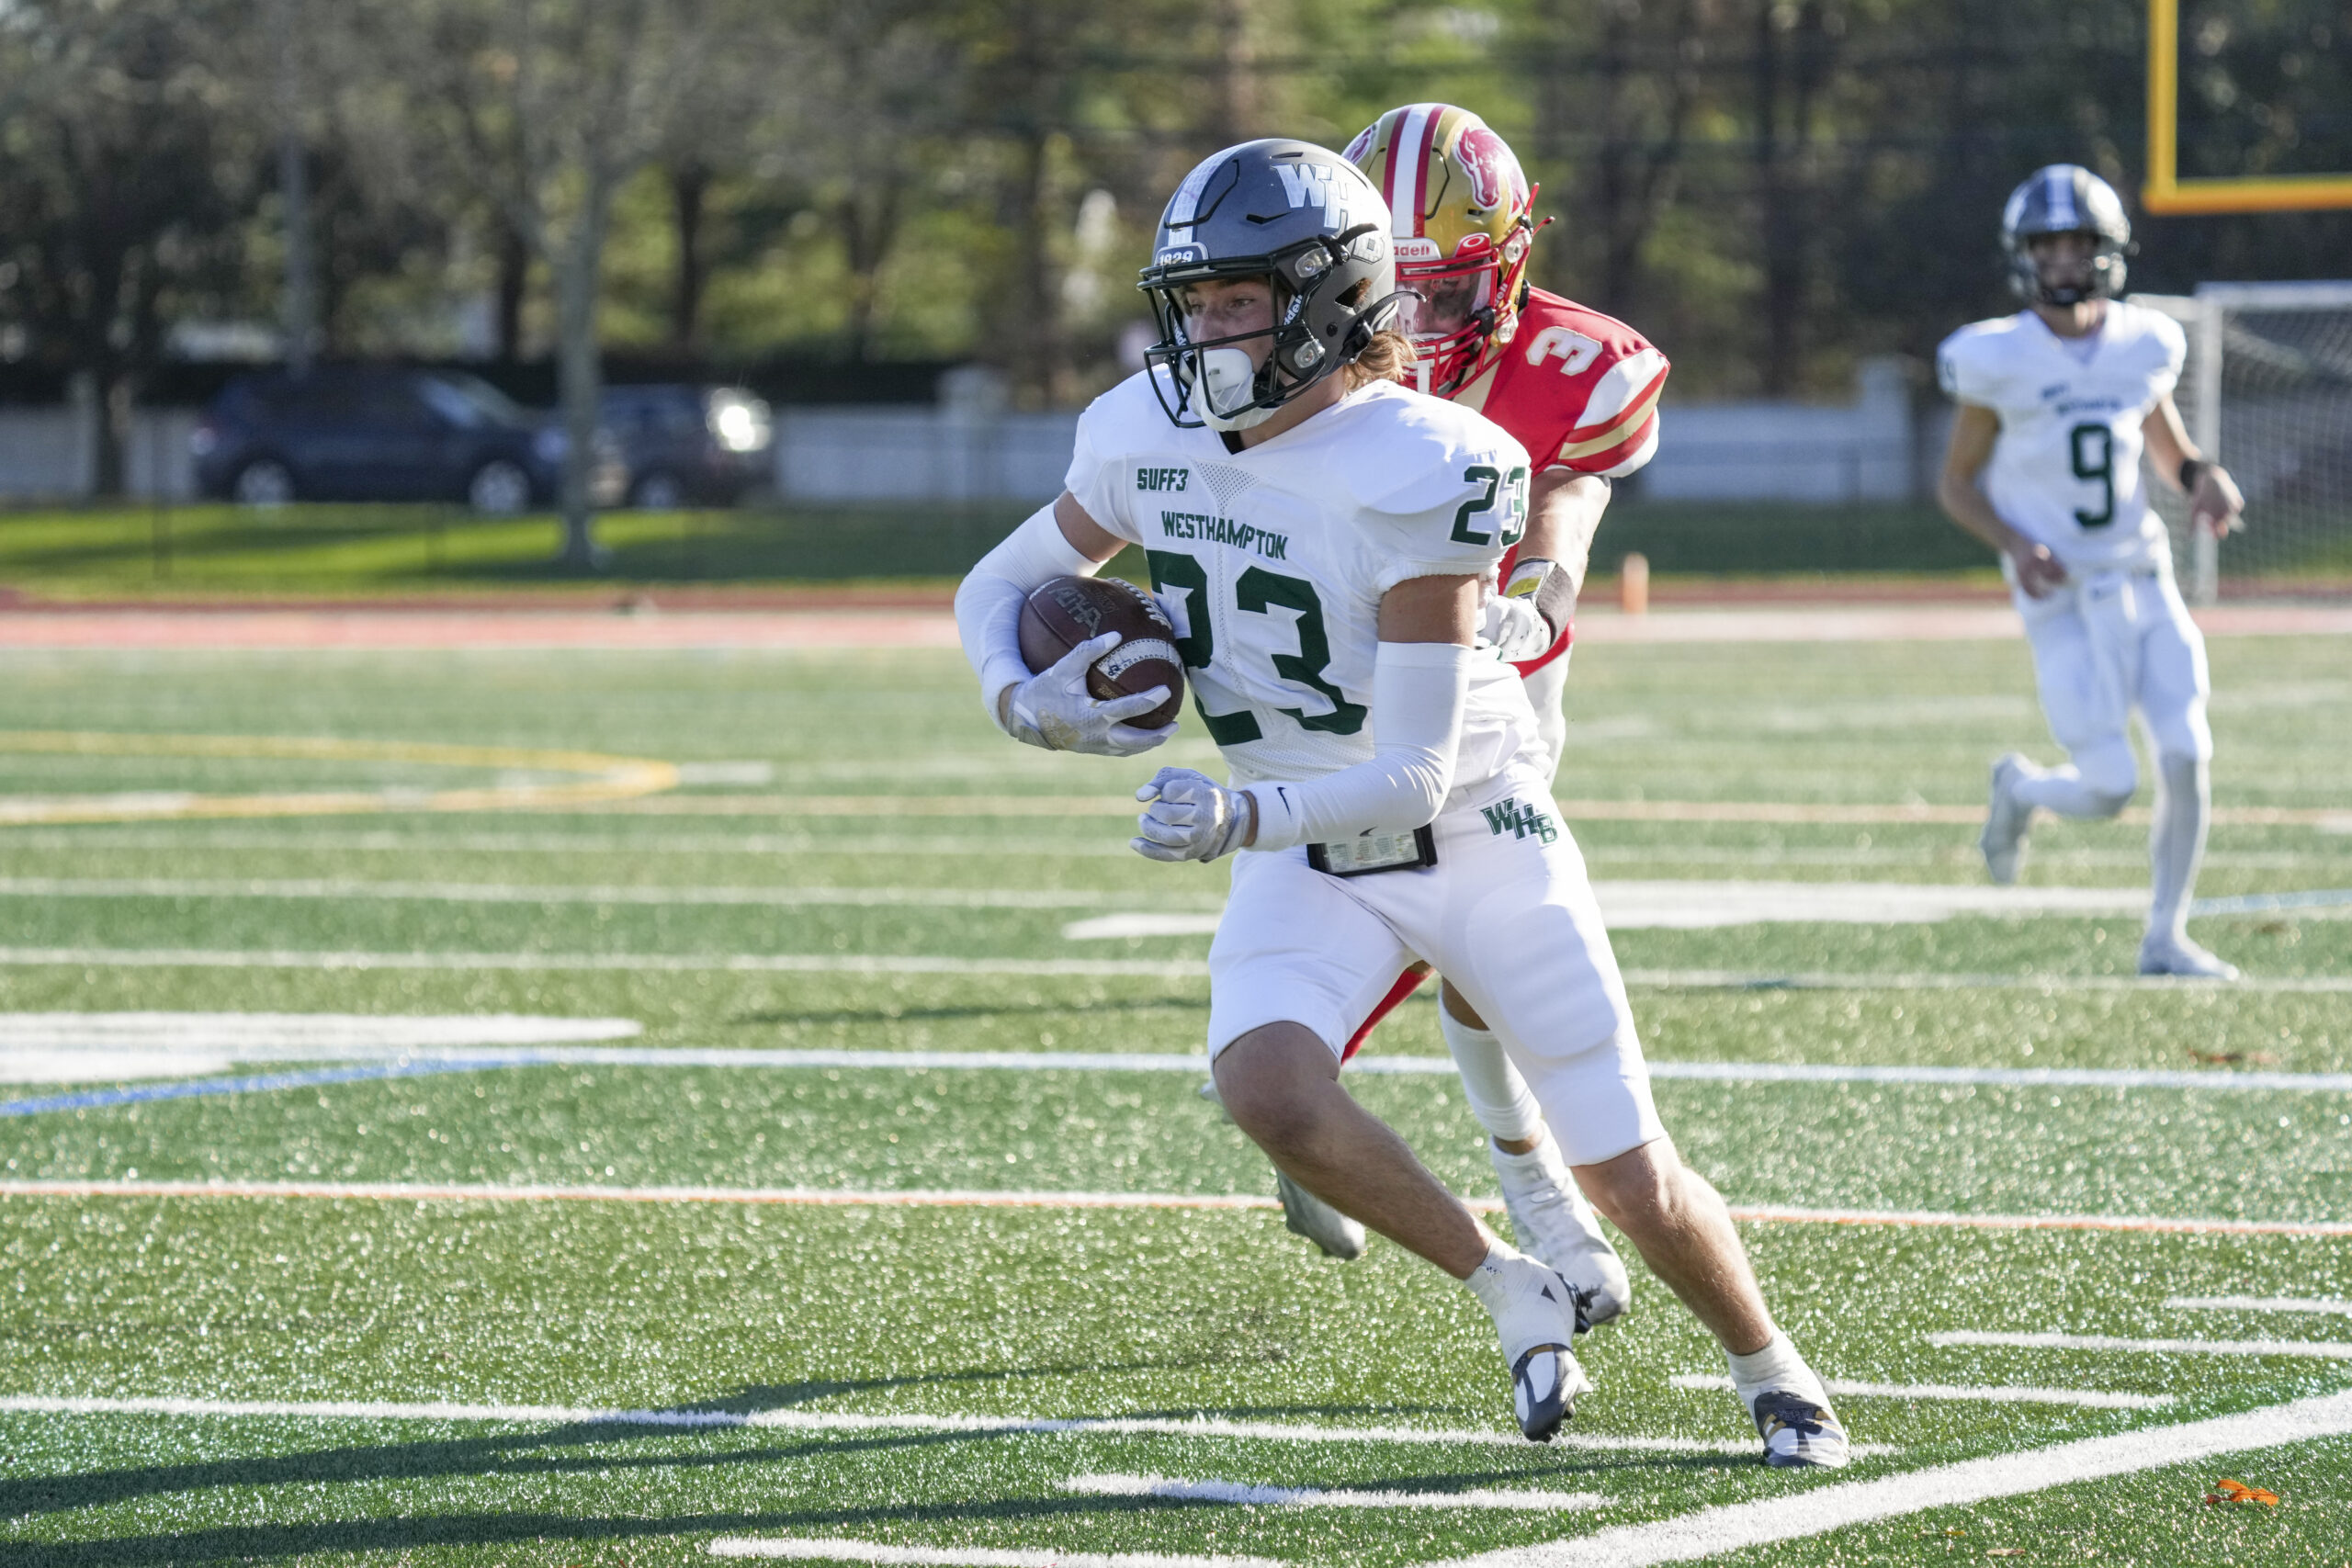 Westhampton Beach junior Heath Sumwalt gains some yards before a Hills West player catches up to him.    RON ESPOSITO